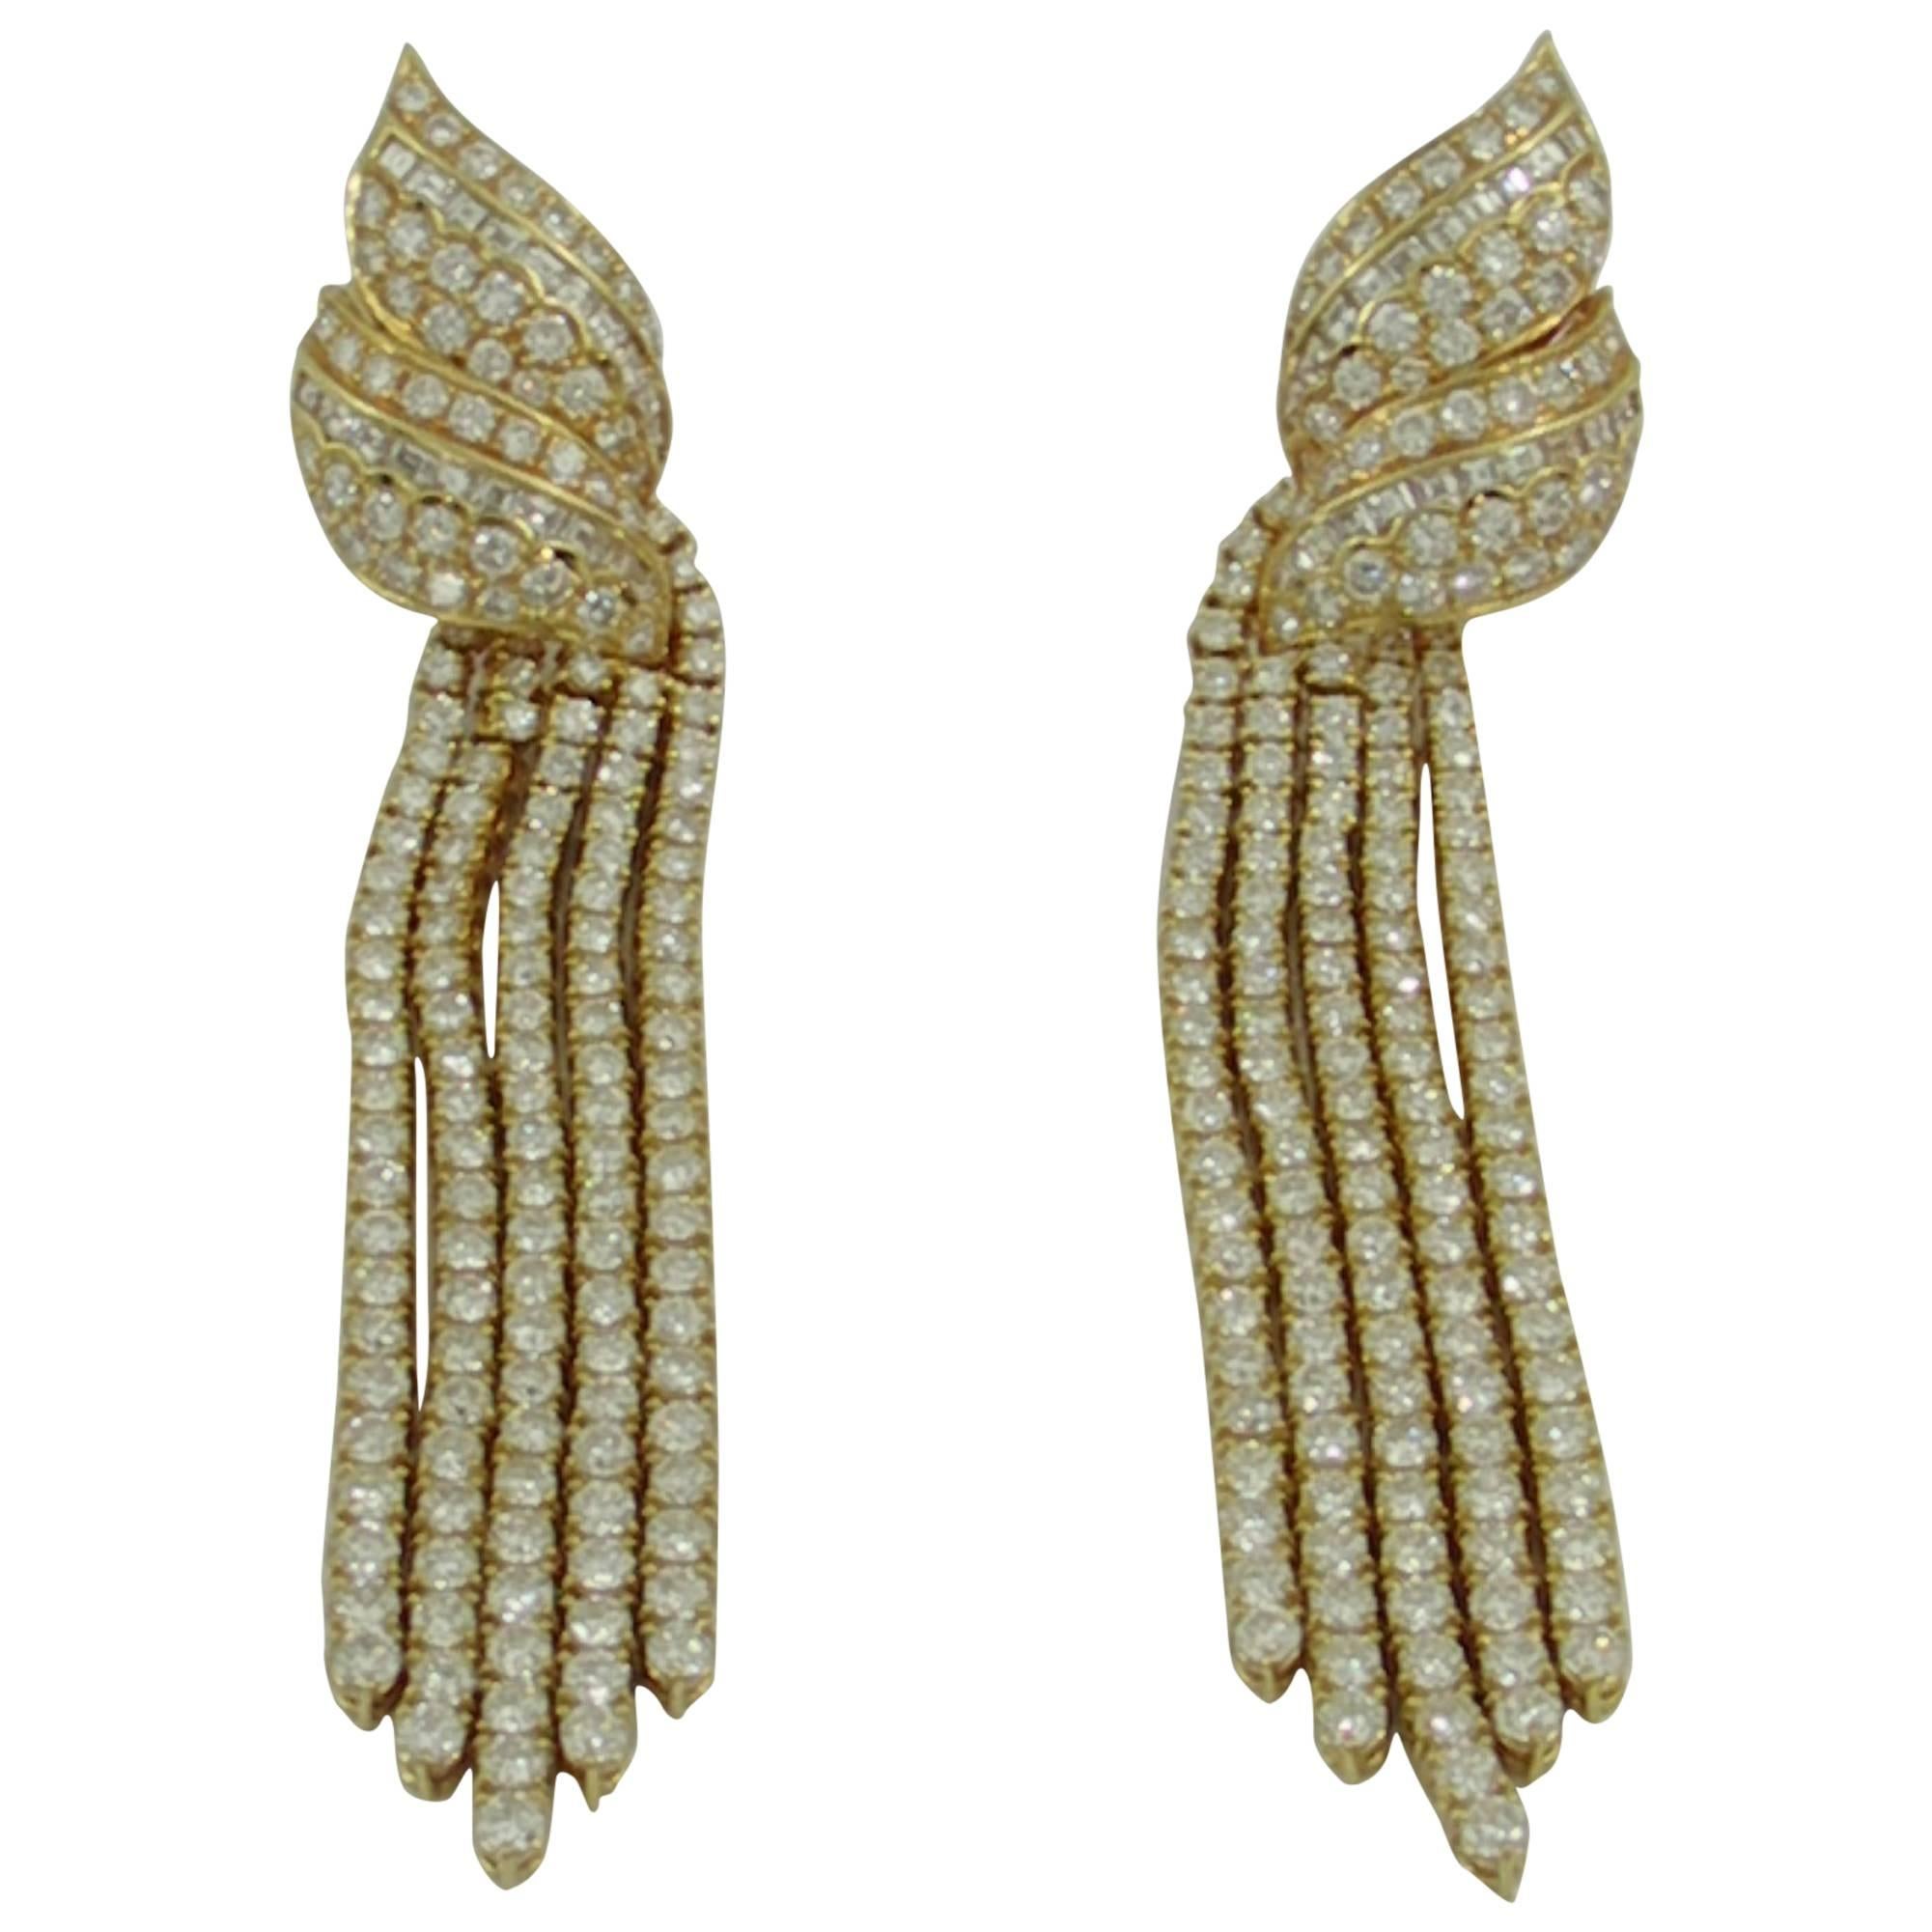 A dramatic pair of gold and diamond chandelier earrings, with double up-swept tops, and each bottom comprised of 5 tassels. Each glamorous earring measures 11/16 of an inch wide, by 3 3/4 inches long, and are set with a total of 19ct of round